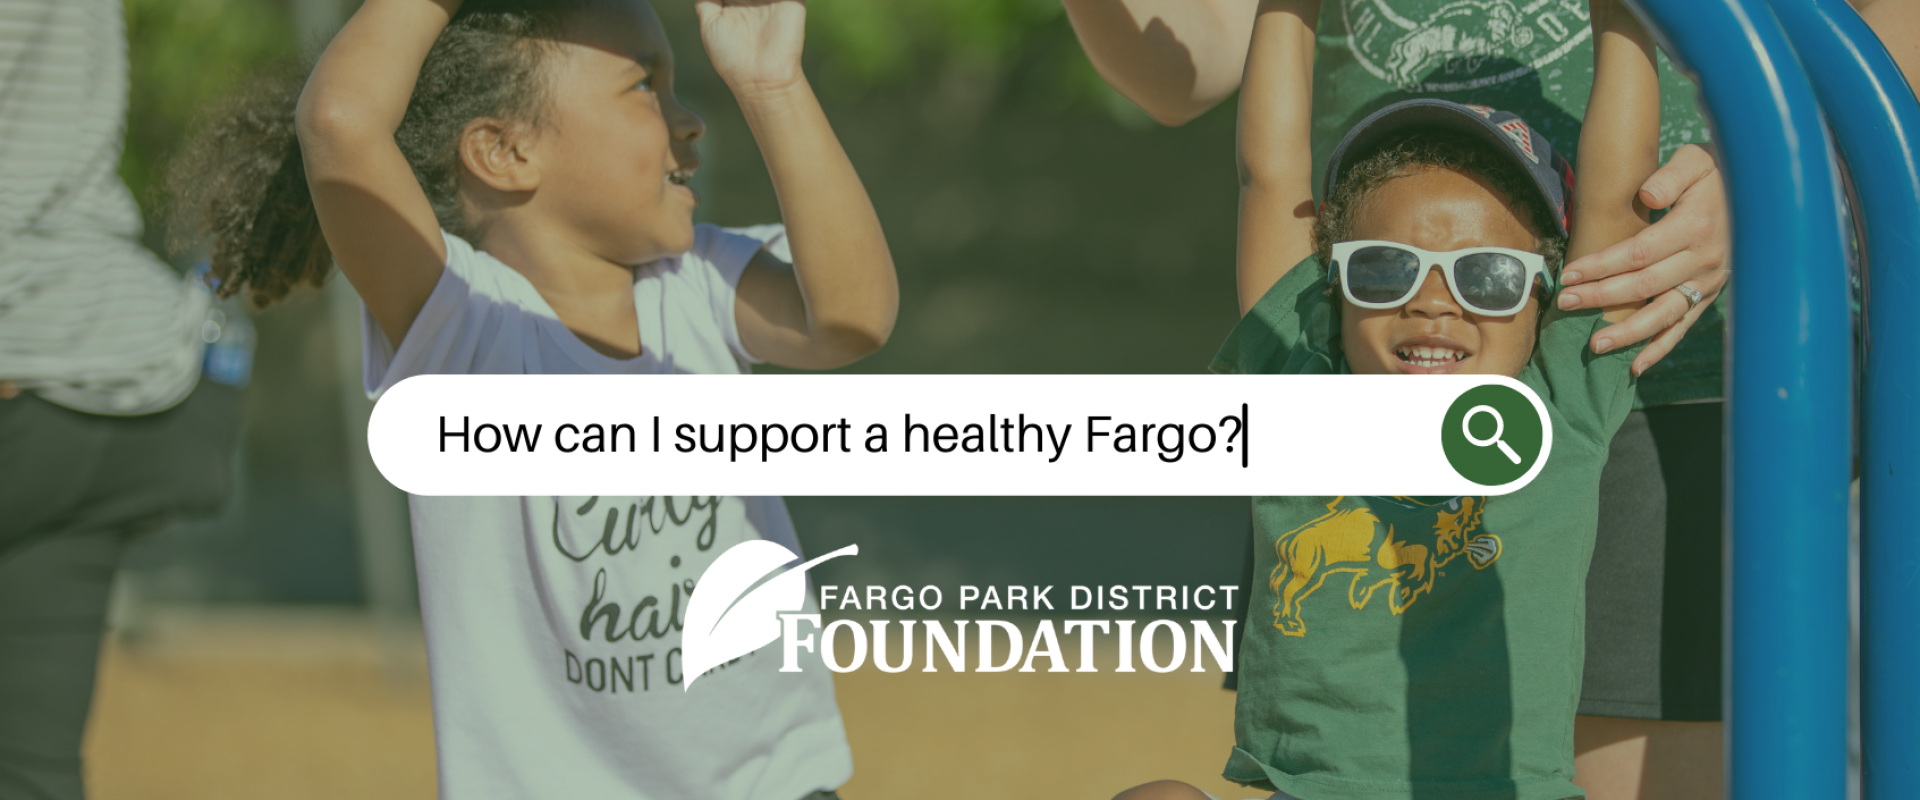 This photo shows 2 kids playing on a playground with the words in a search engine saying how can I support a healthy Fargo?